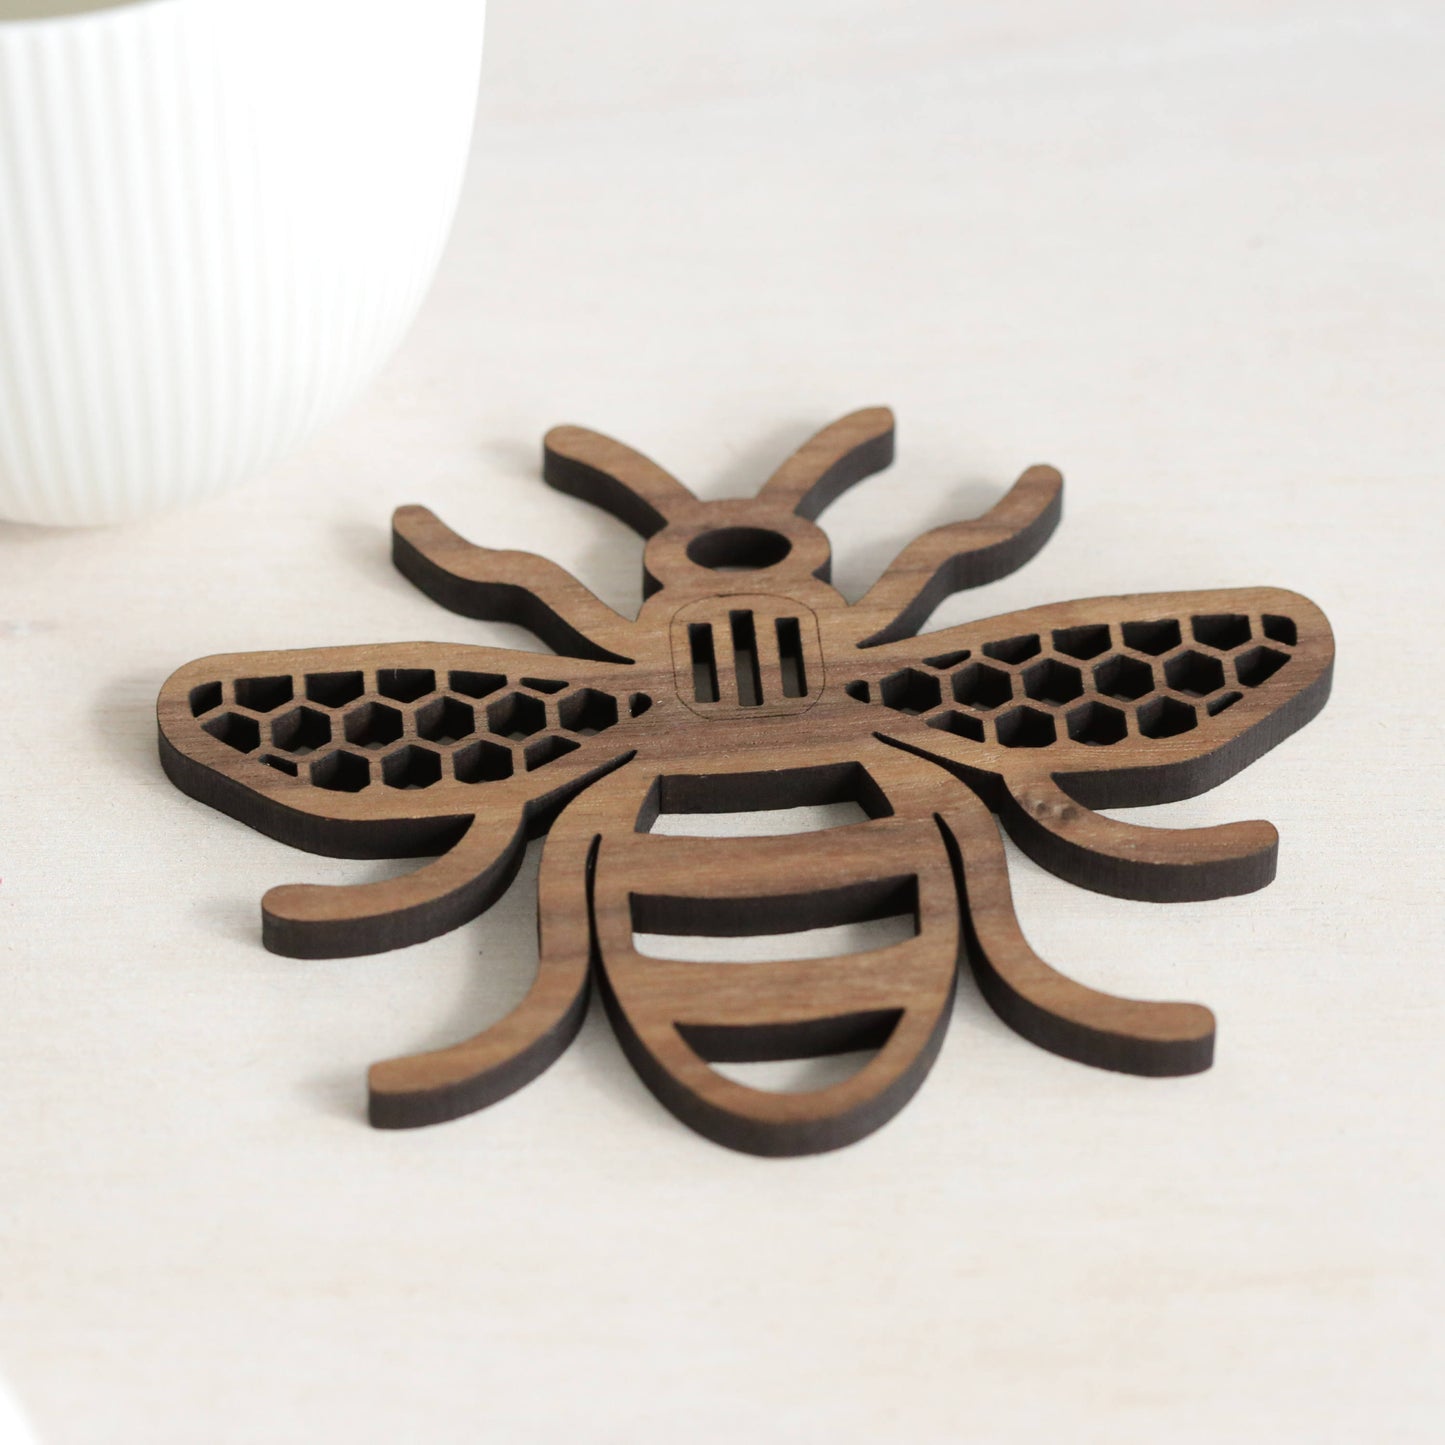 Manchester Bee - real wood coaster - Mancunian - personalised gift